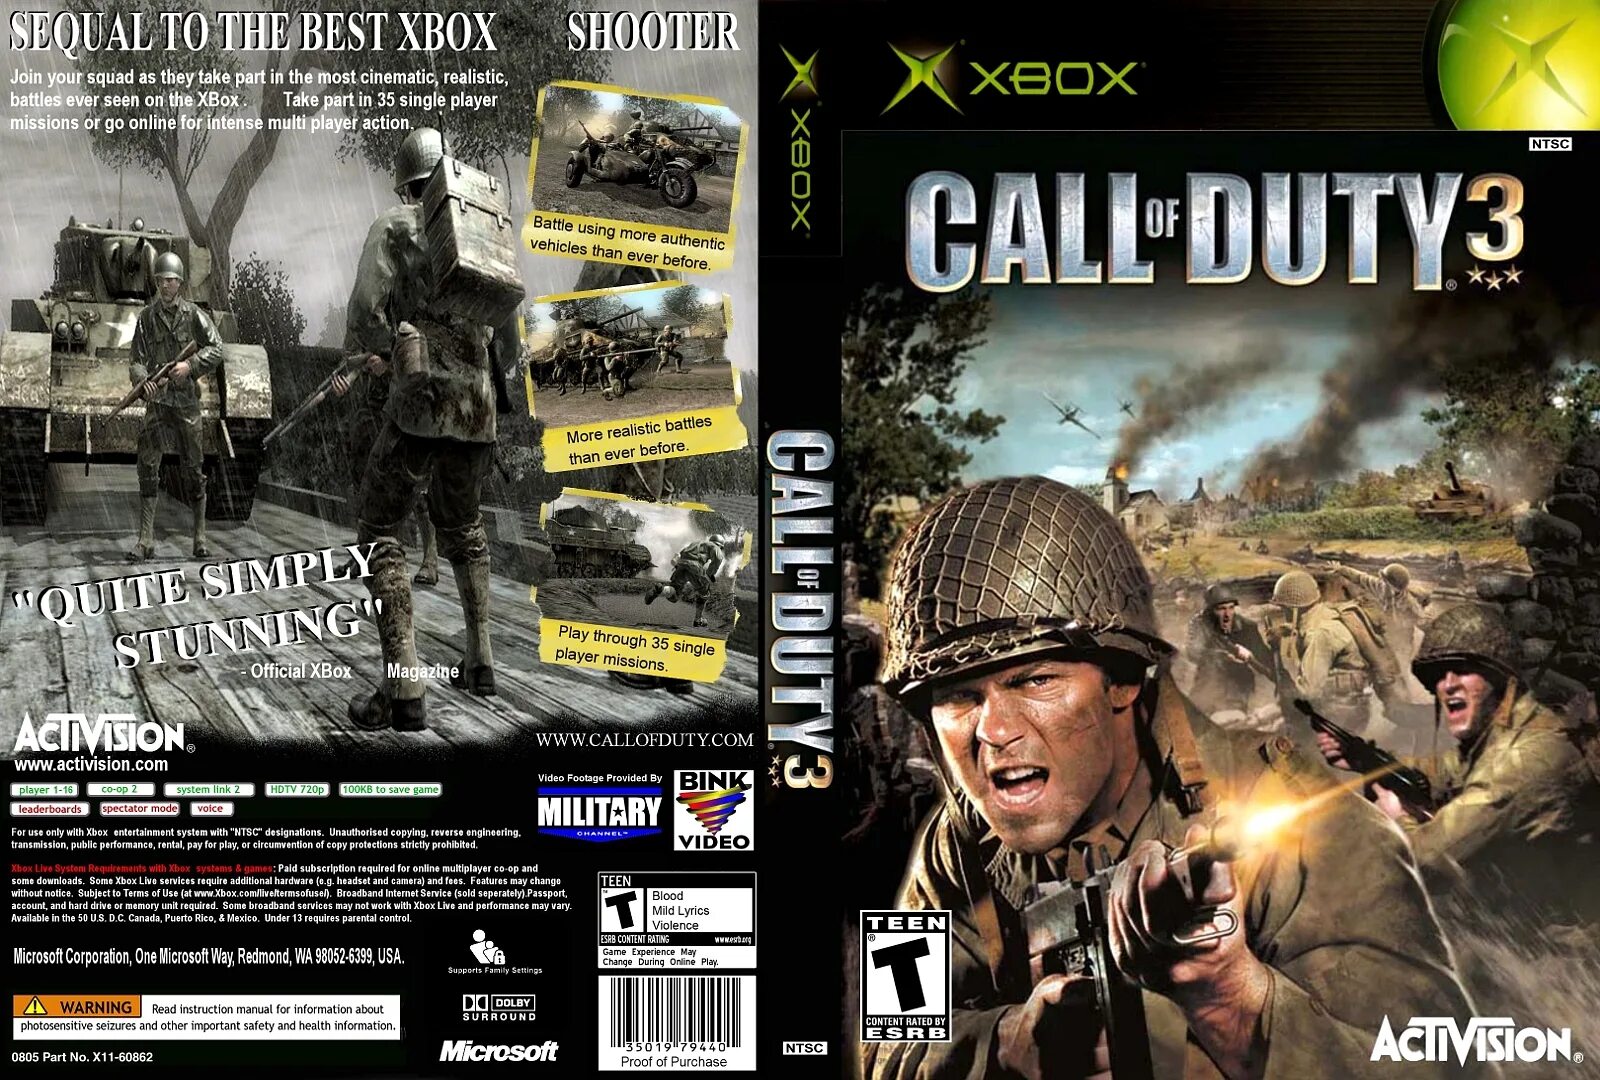 Call of Duty 3 Xbox 360 диск. Call of Duty 3 Xbox 360 обложка. Call of Duty 3 ps2 обложка. Call of Duty 2 PS 2 диск. Without notice